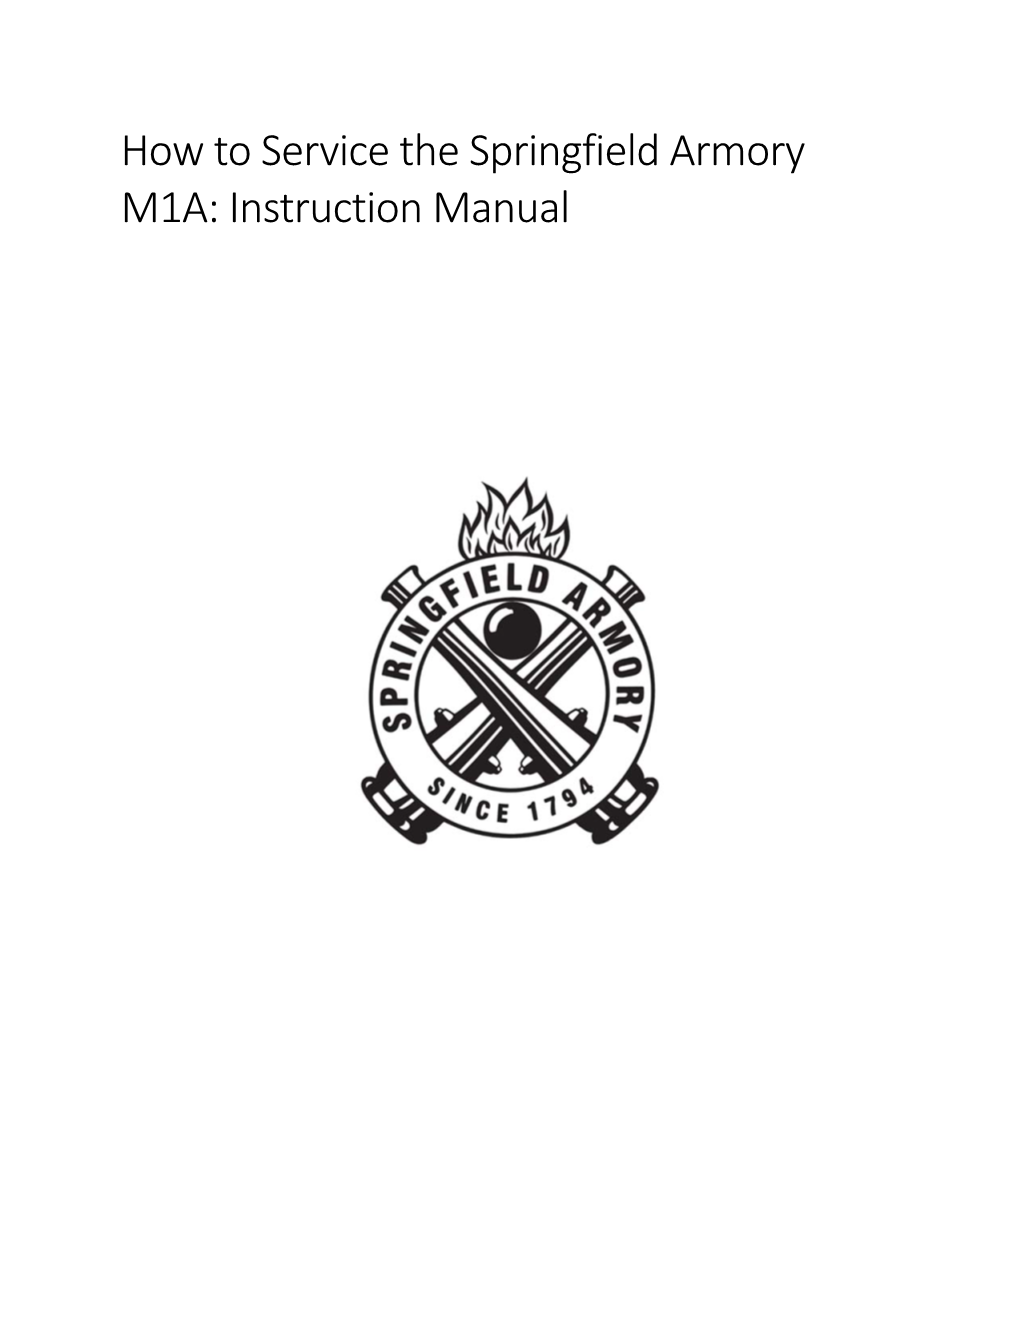 How to Service the Springfield Armory M1A: Instruction Manual